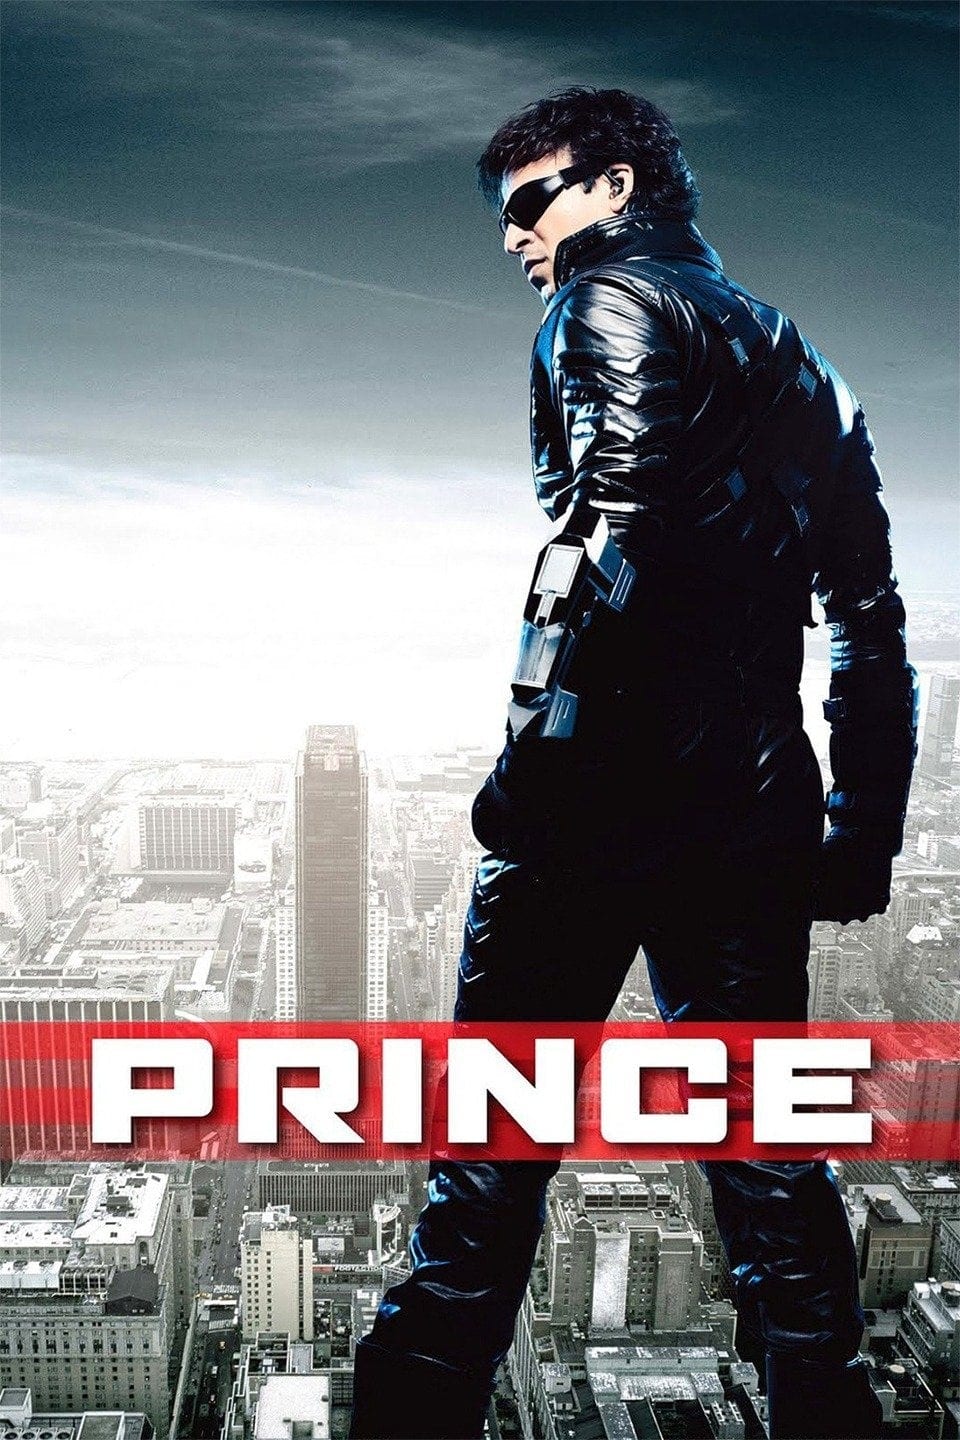 Poster for the movie "Prince"